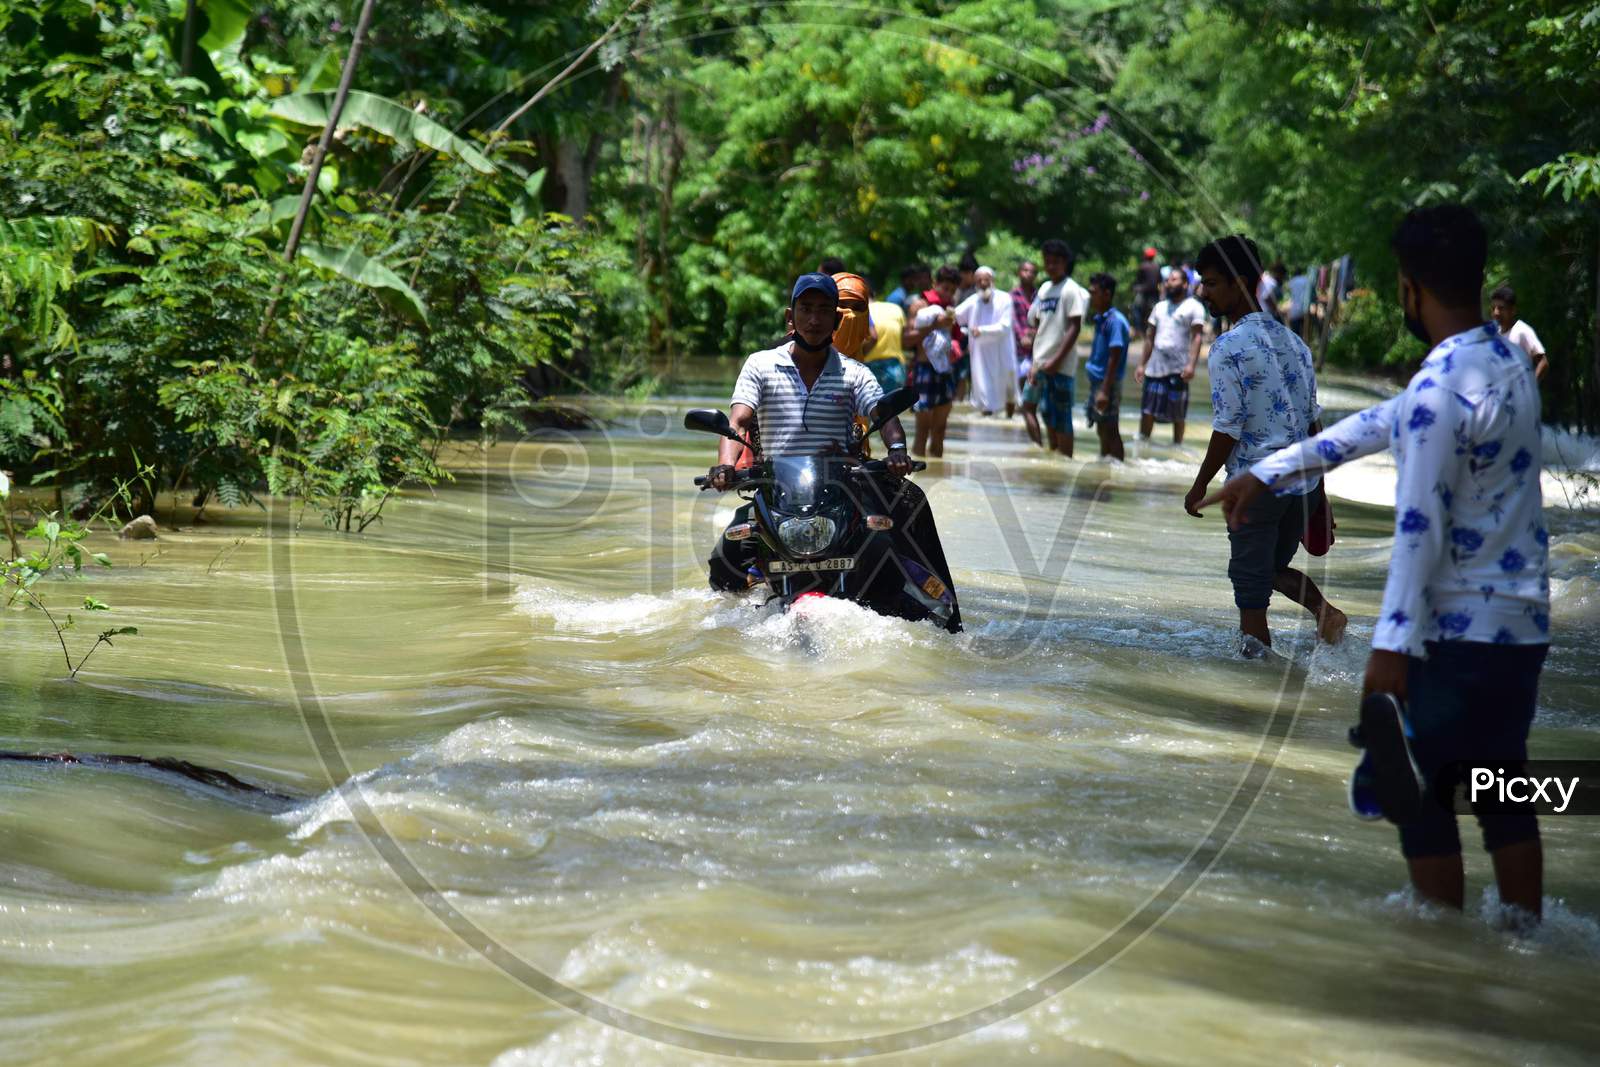 A Man Ride His Bike  Through A Flooded Area To Reach a Safer Place At Doboka  In  Hojai  District Of Assam  On May 28,2020